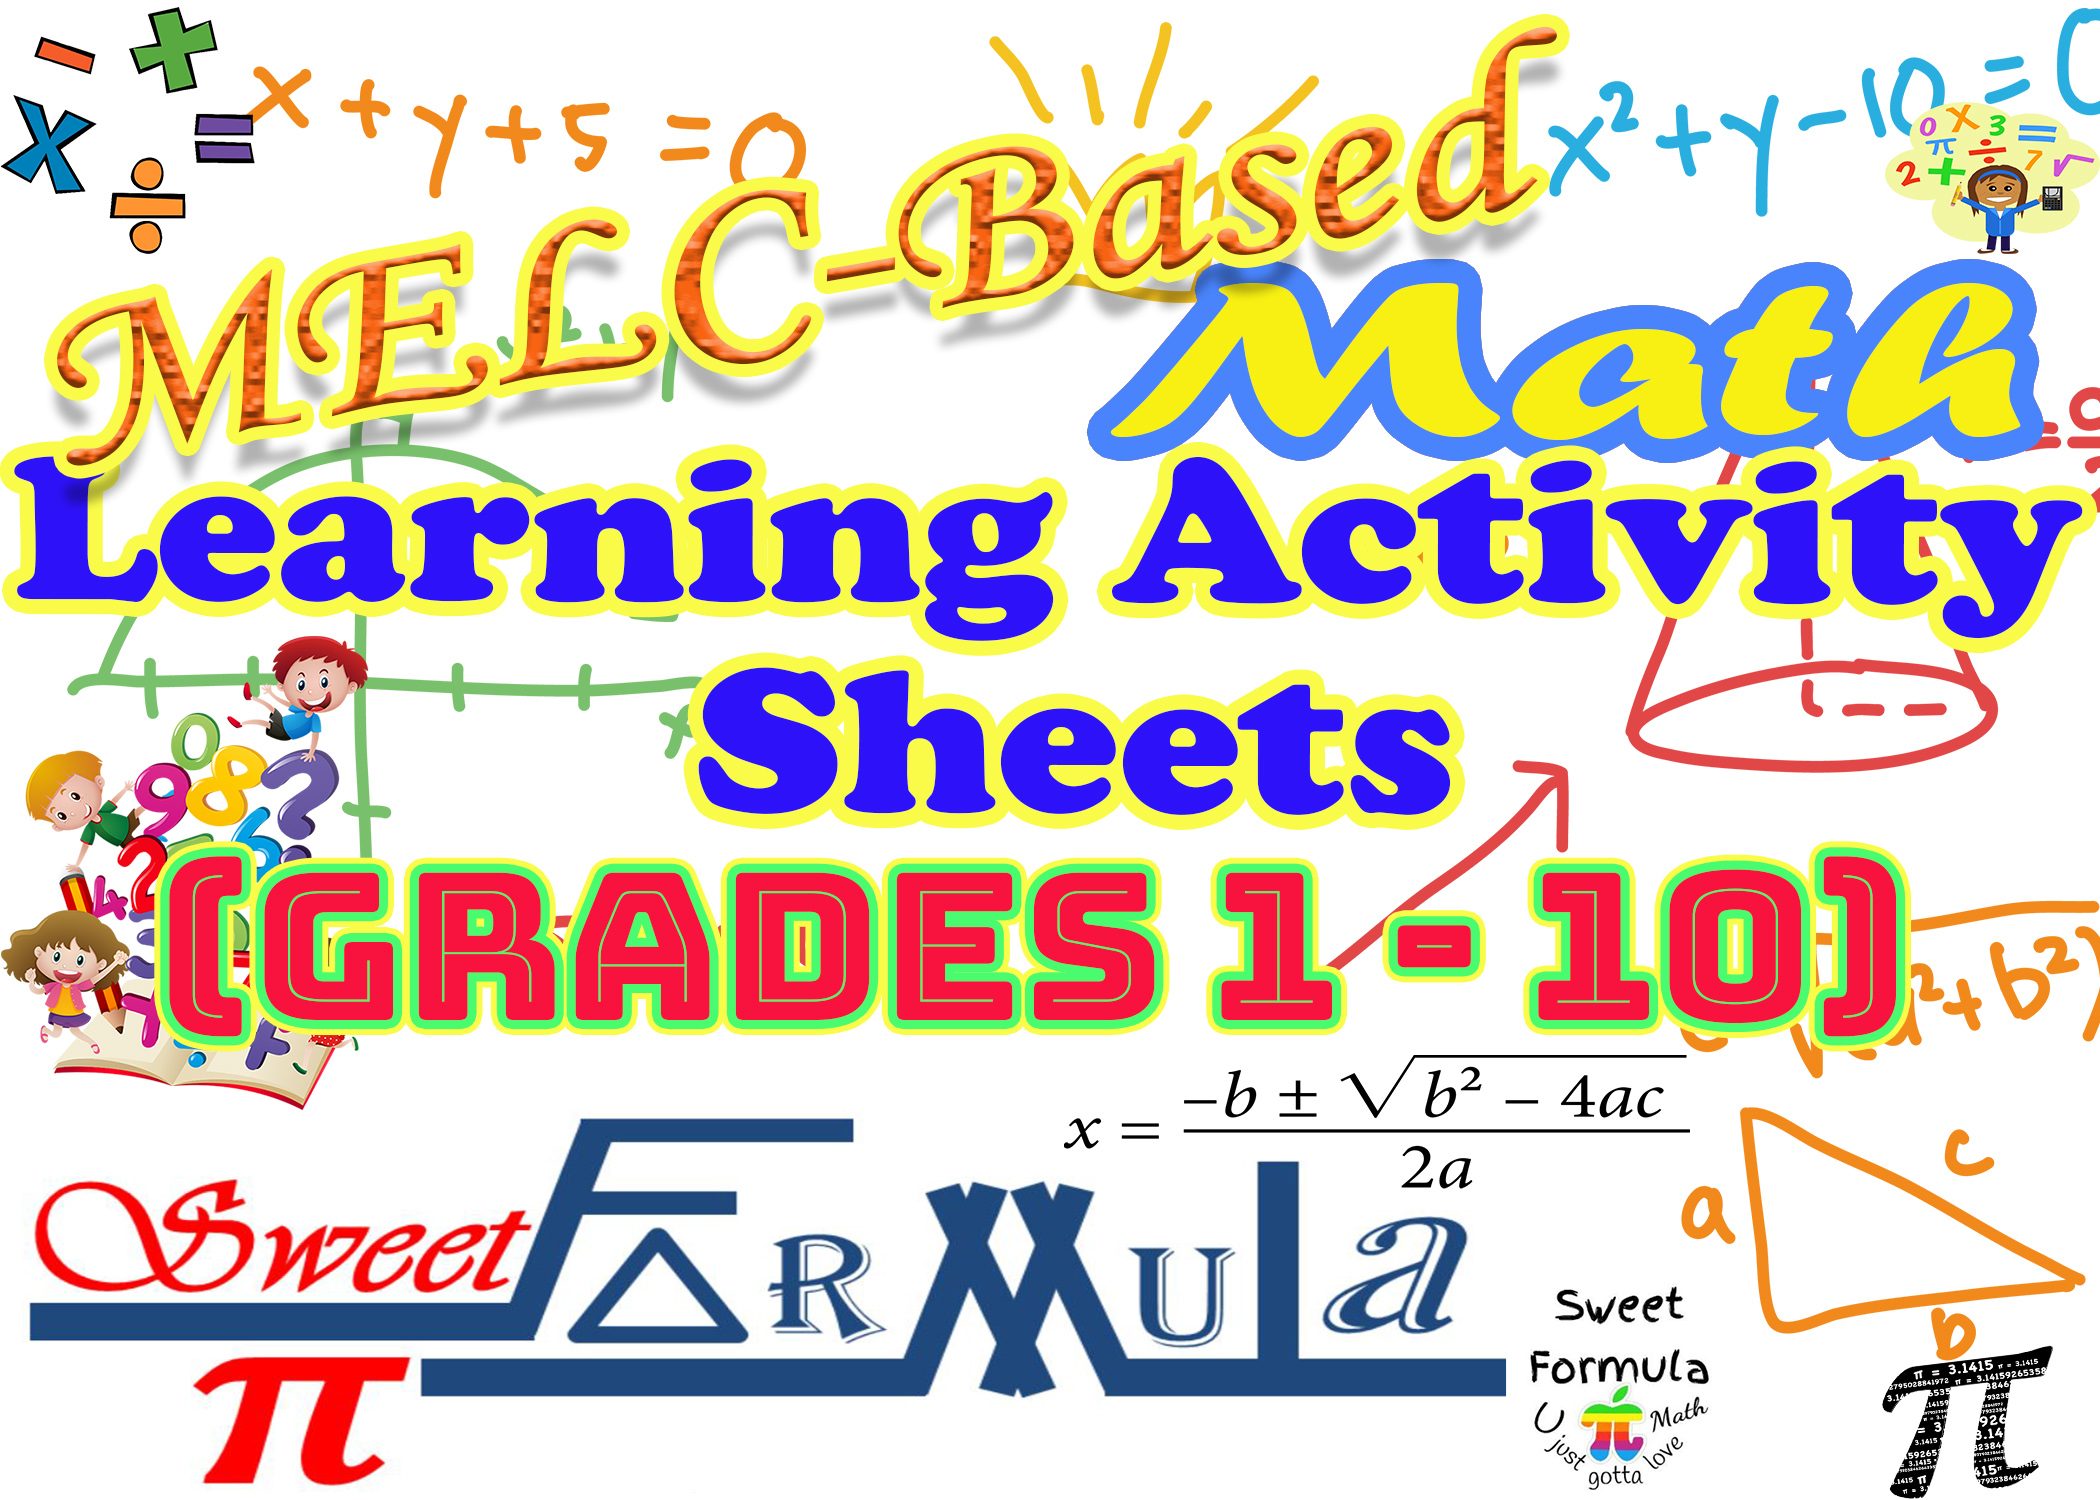 activity sheets for grade 6 based on melc